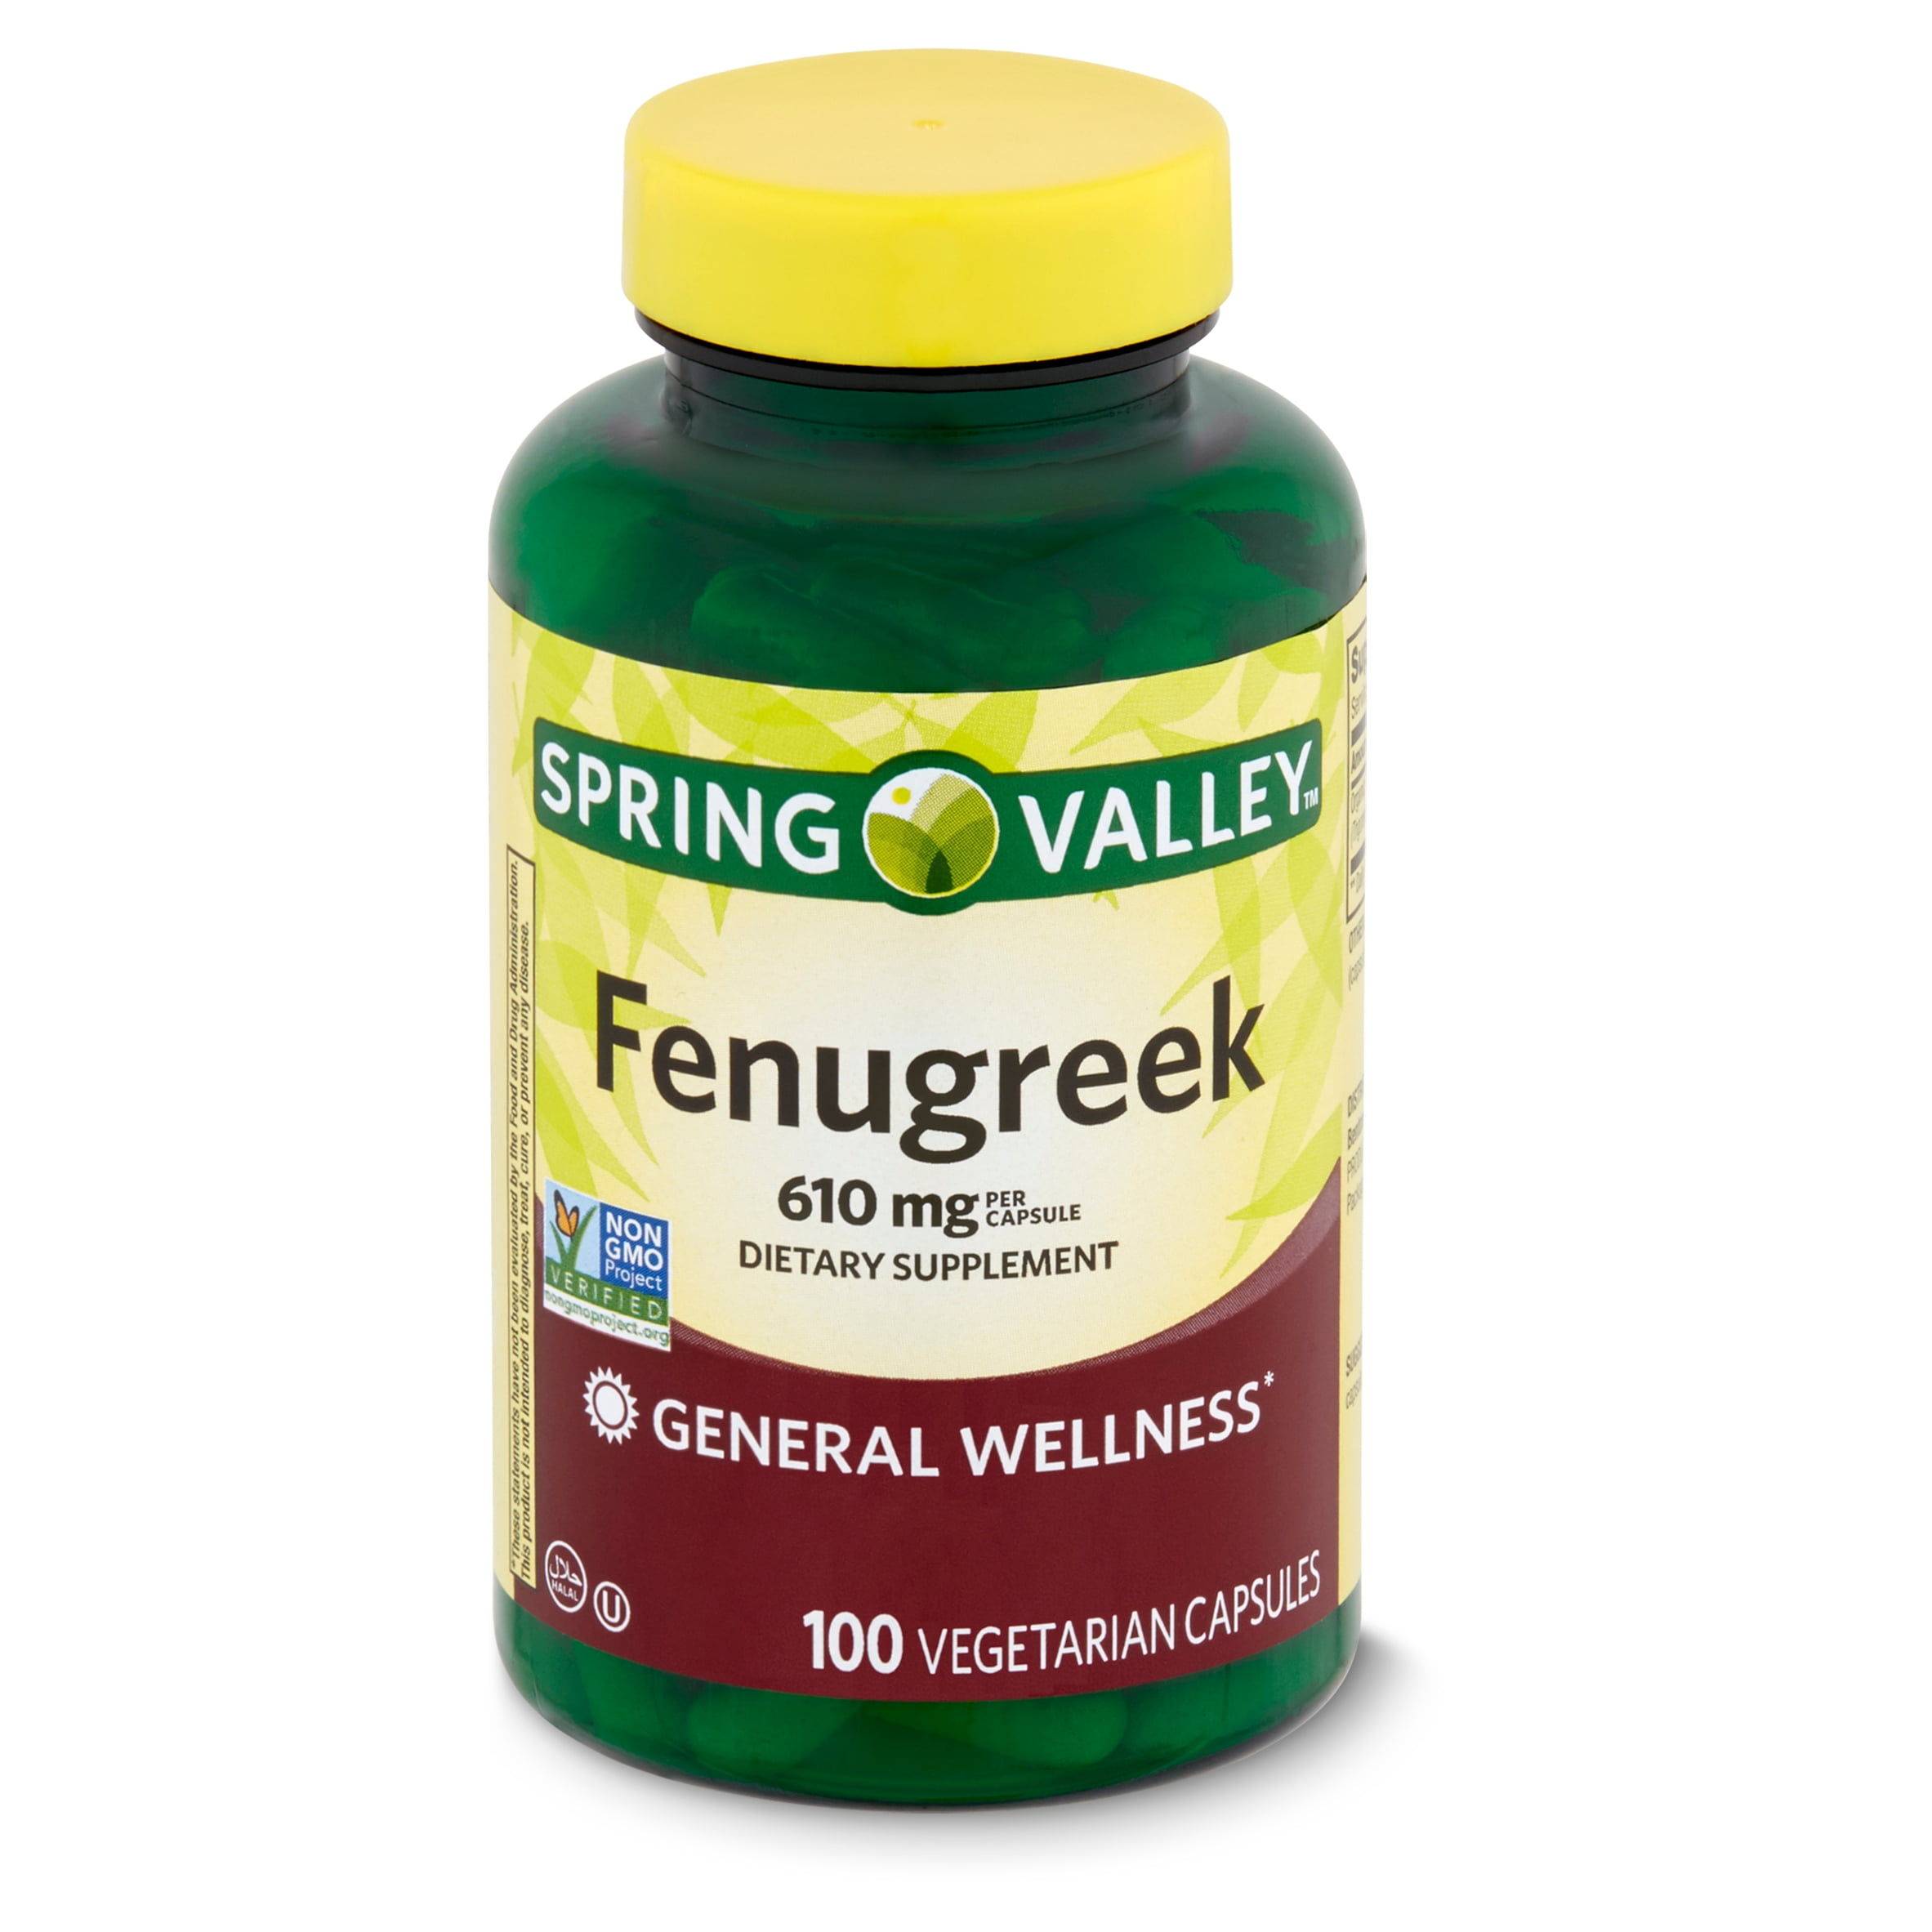 Spring Valley Fenugreek Dietary Supplement, 610 mg, 100 Count